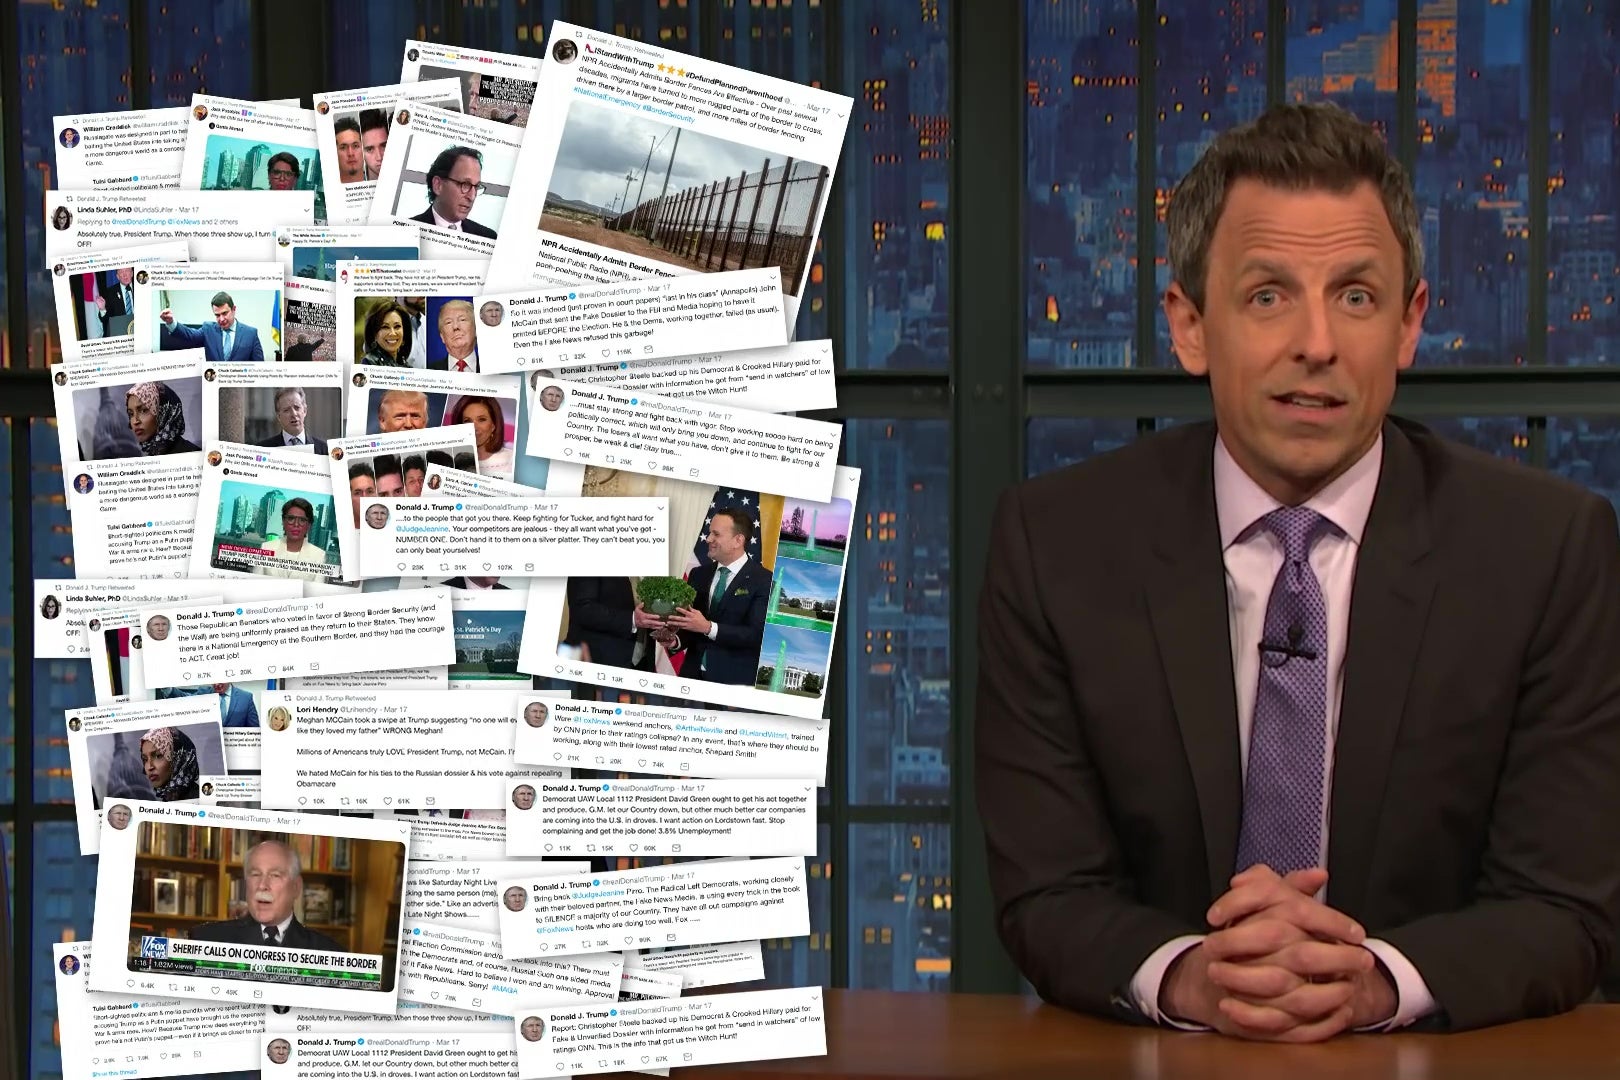 Seth Meyers in front of a graphic of Donald Trump's horrible tweets.